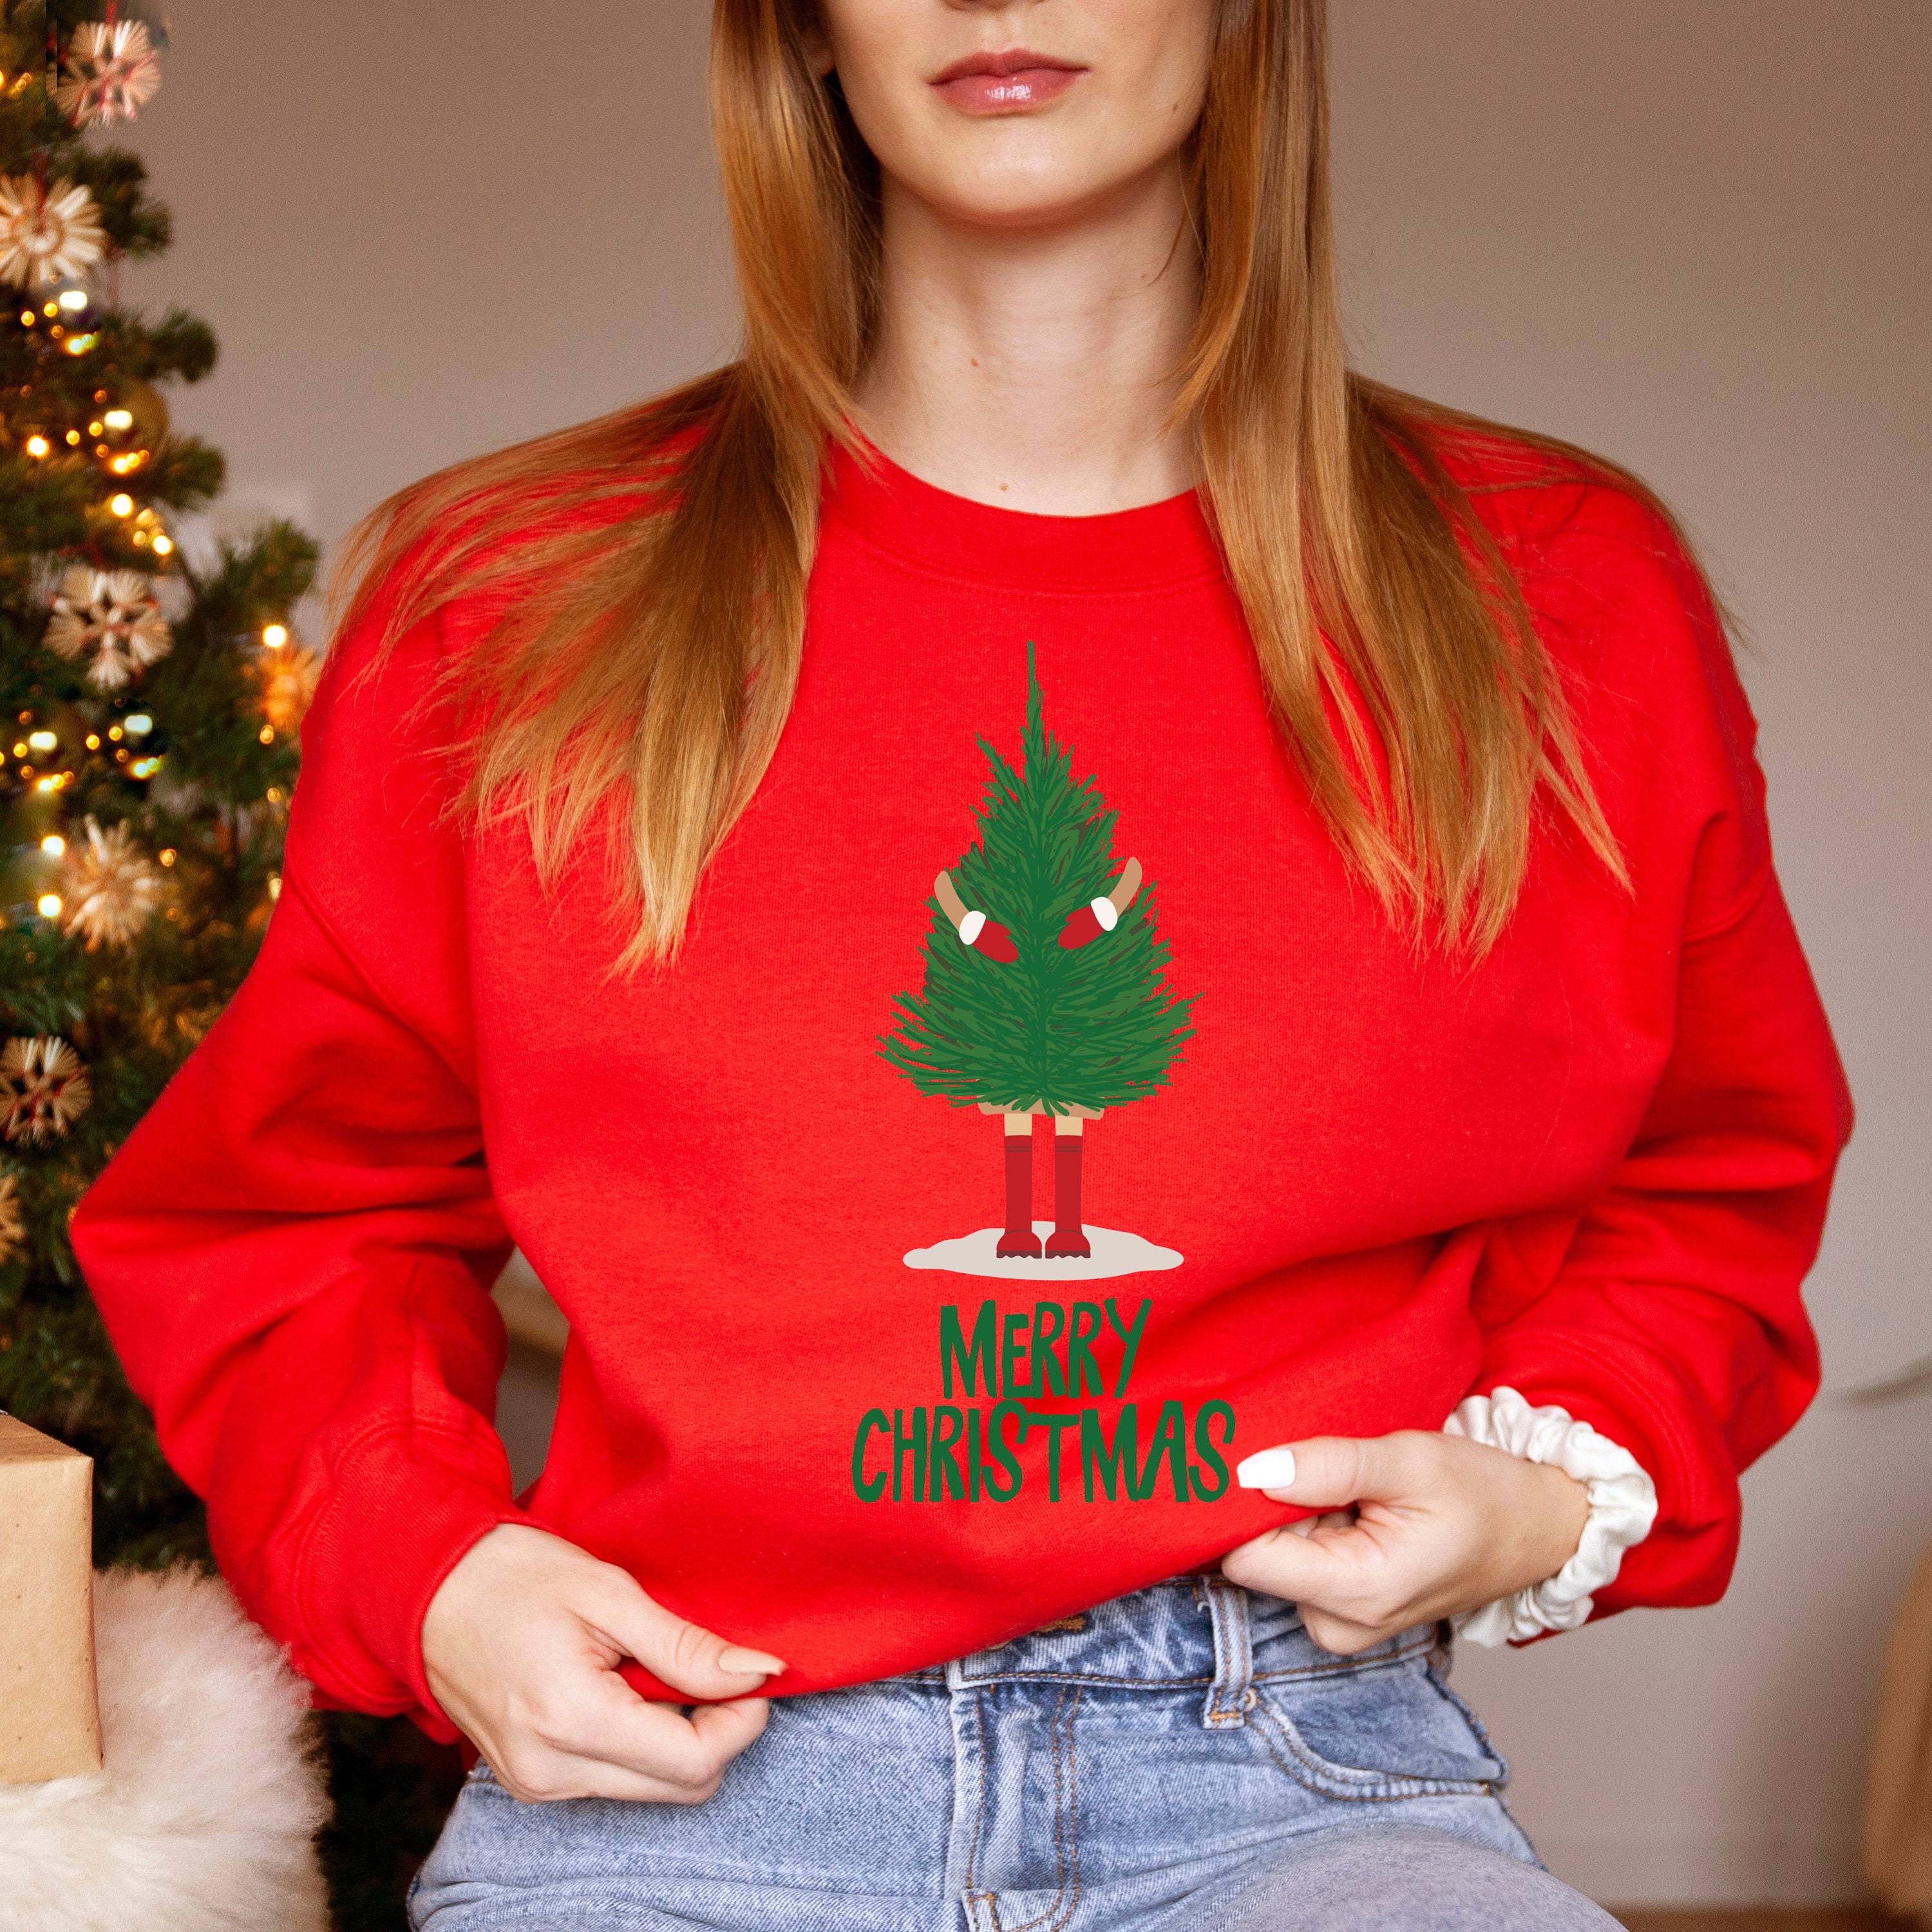 Christmas tree Merry Christmas jumper, Unisex Adult & Kids sizes, Matching Family jumpers